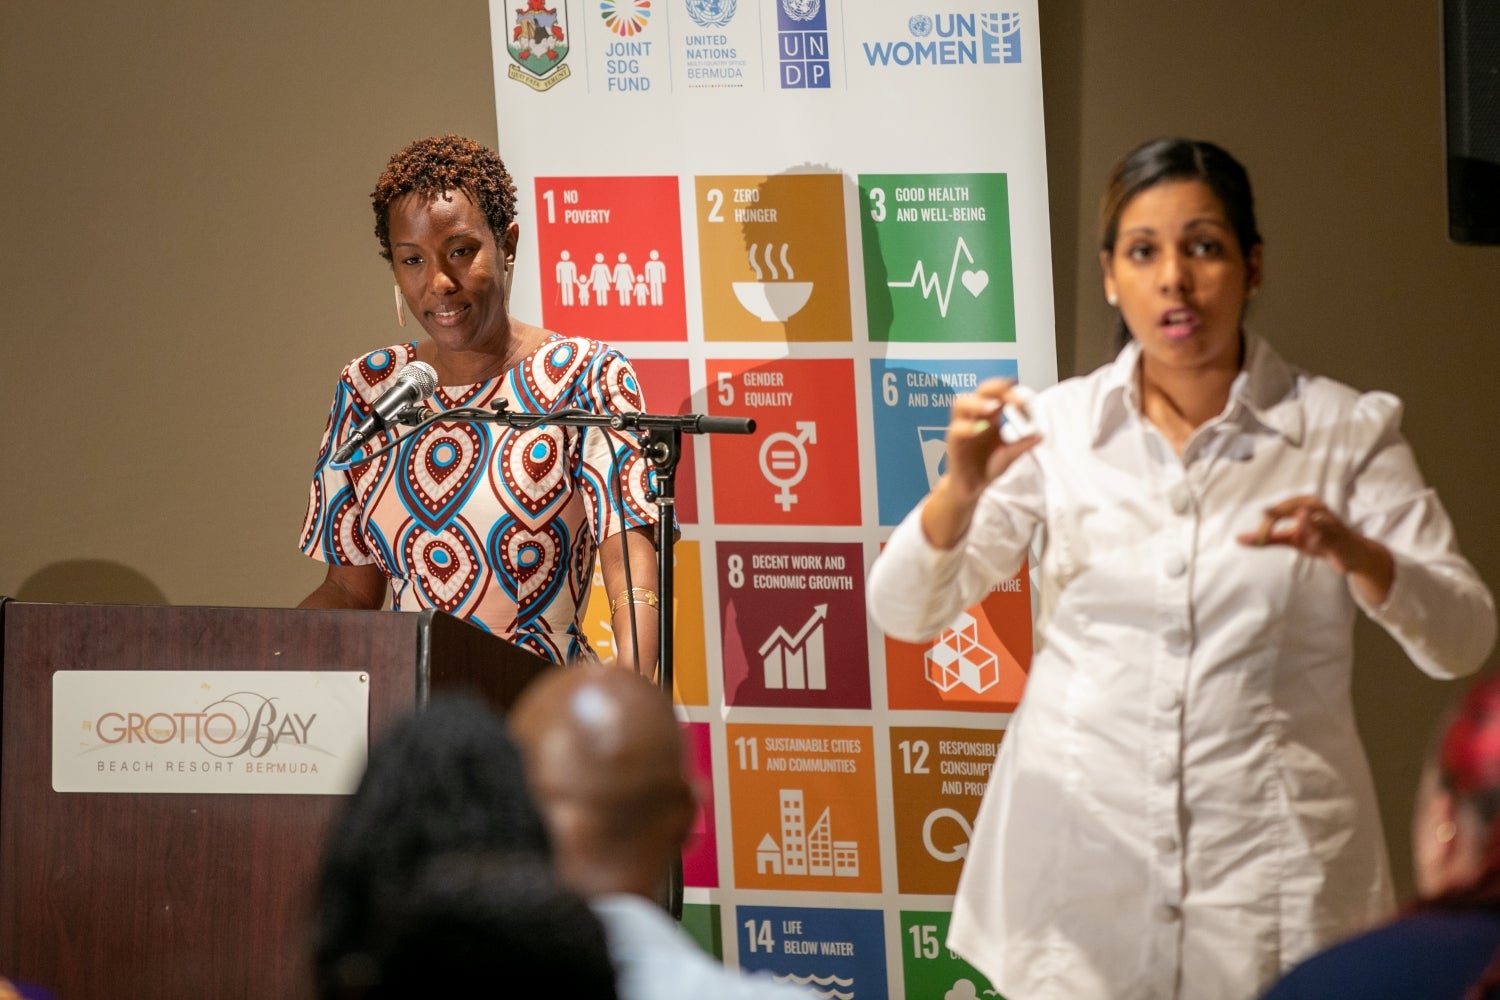 UN Women Multi Country Office – Caribbean Representative, Tonni Brodber delivers remarks at the launch of the UN Joint SDG Fund Innovative Financing for Gender Equality Project in Bermuda